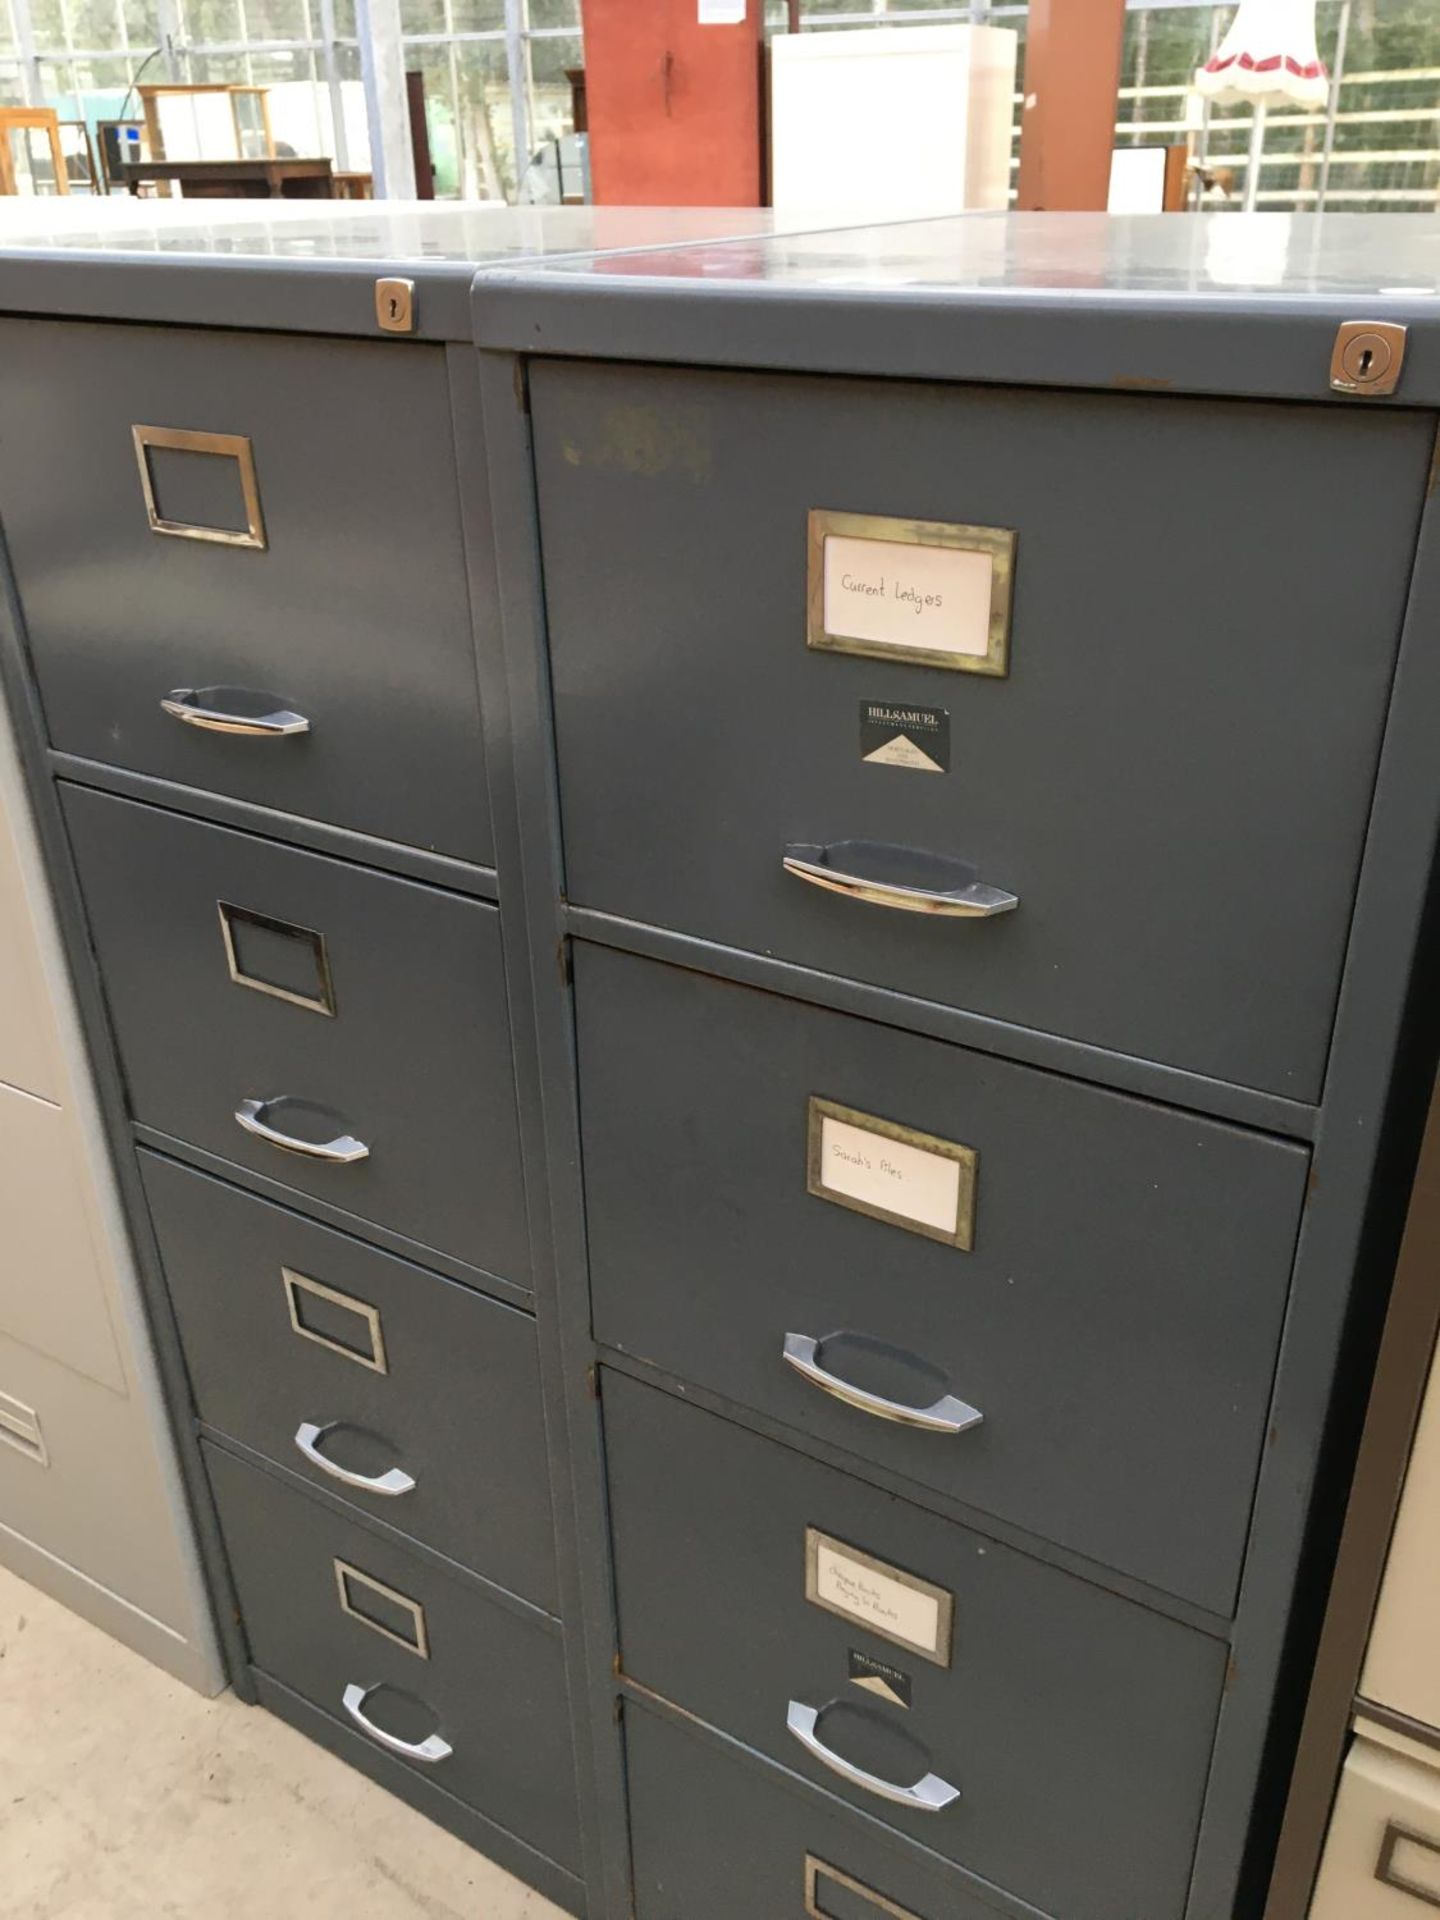 TWO FOUR DRAWER GREY METAL FILING CABINETS - Image 2 of 2